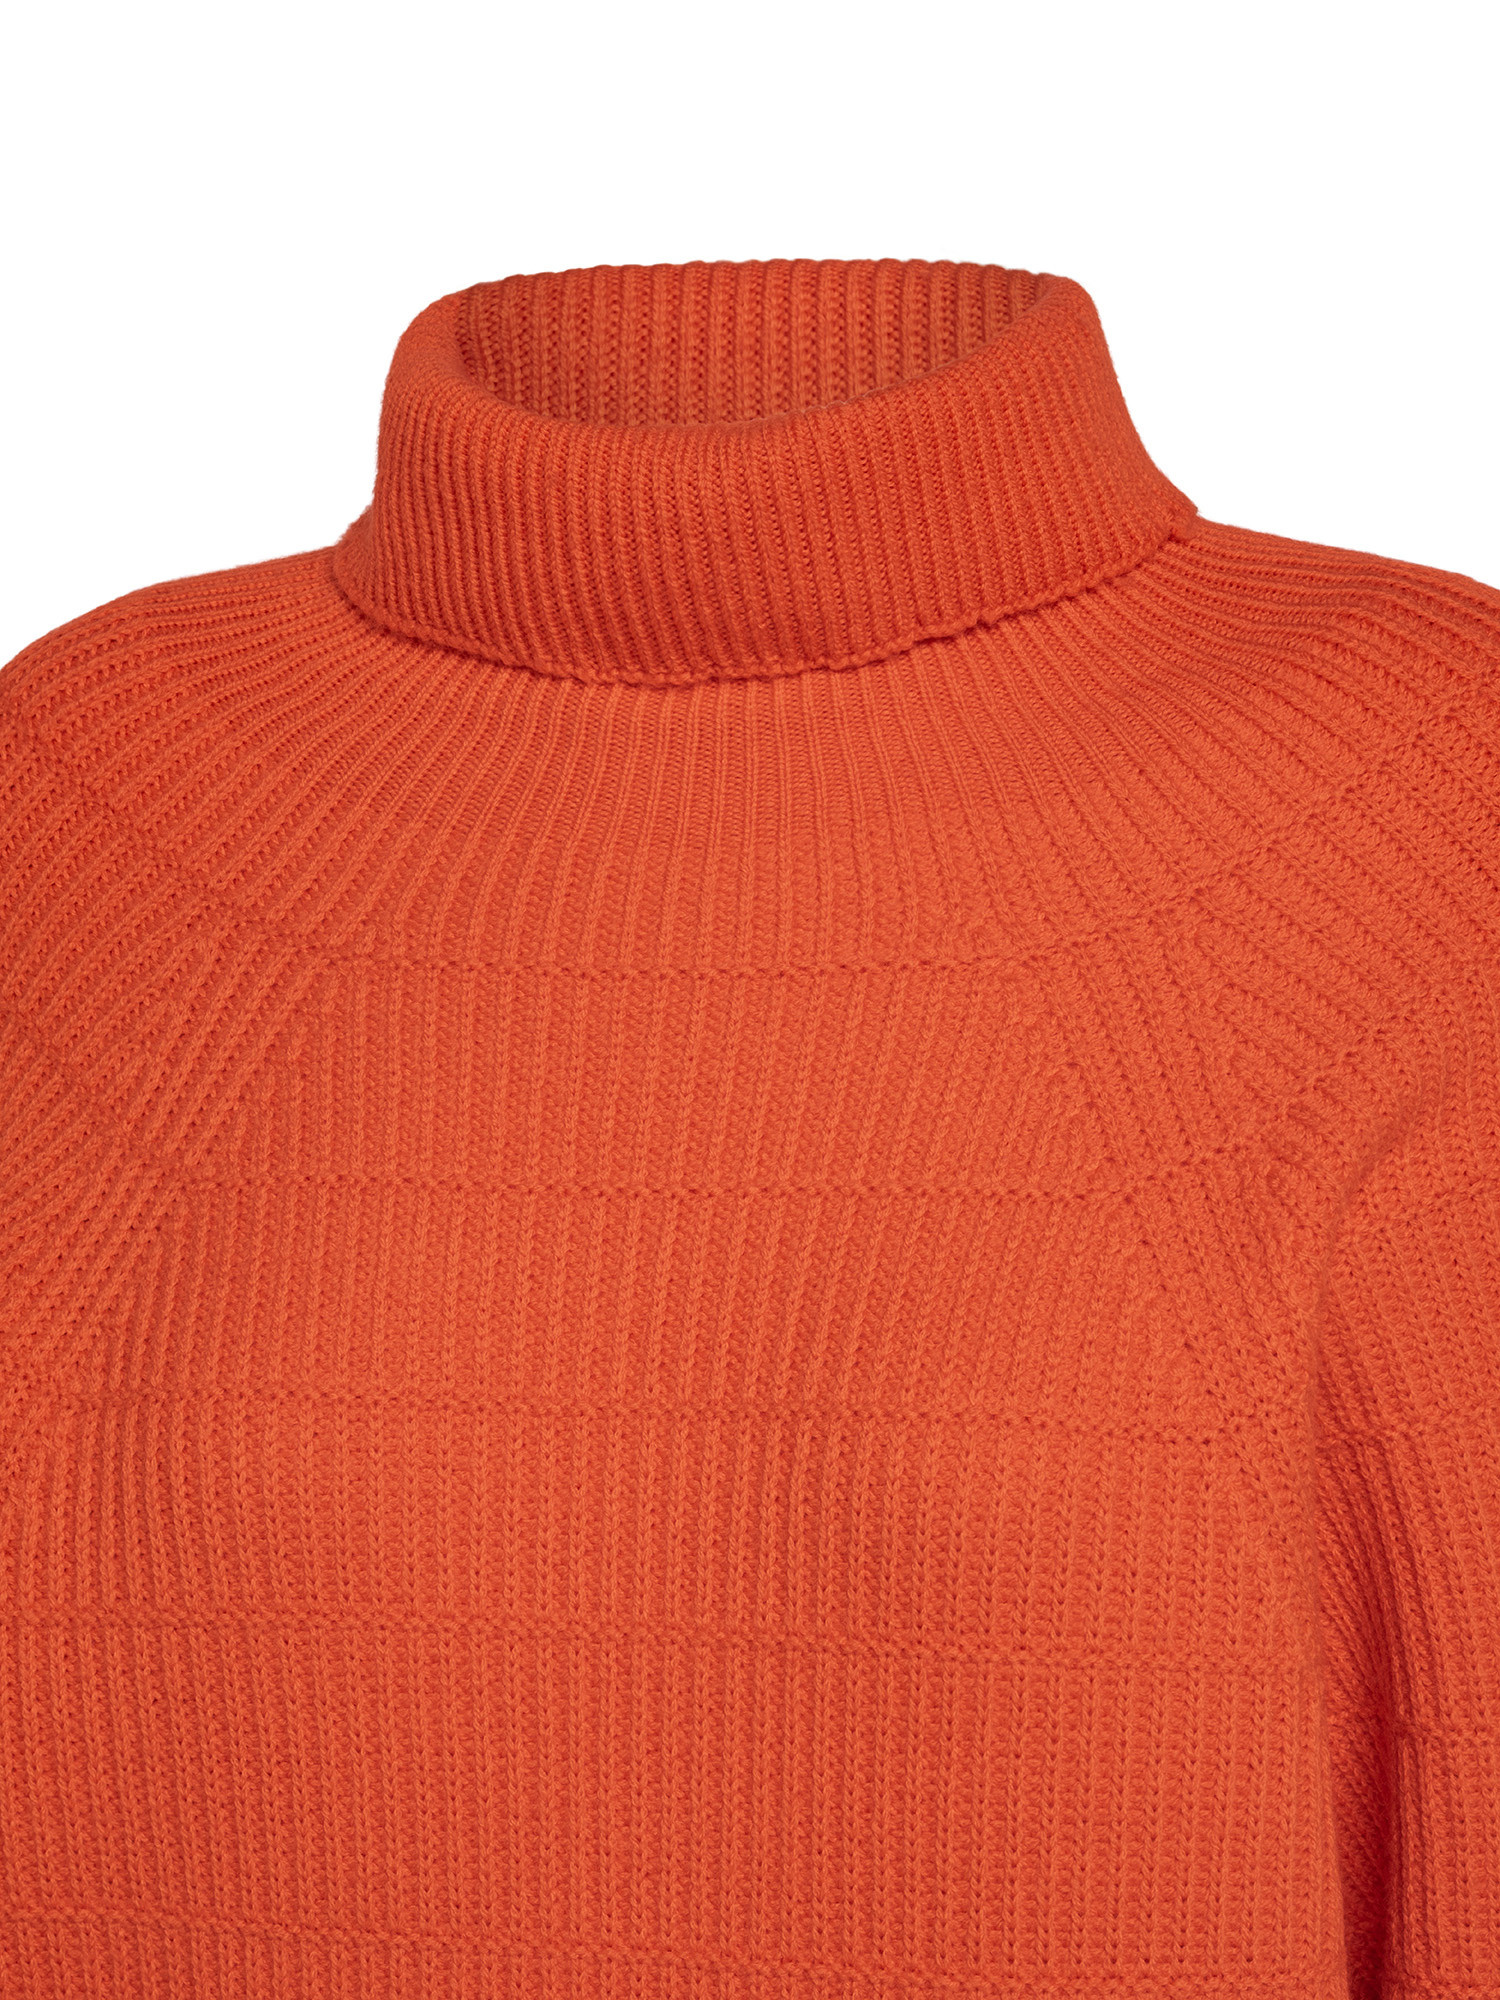 K Collection - Pullover dolcevita, Arancione, large image number 2